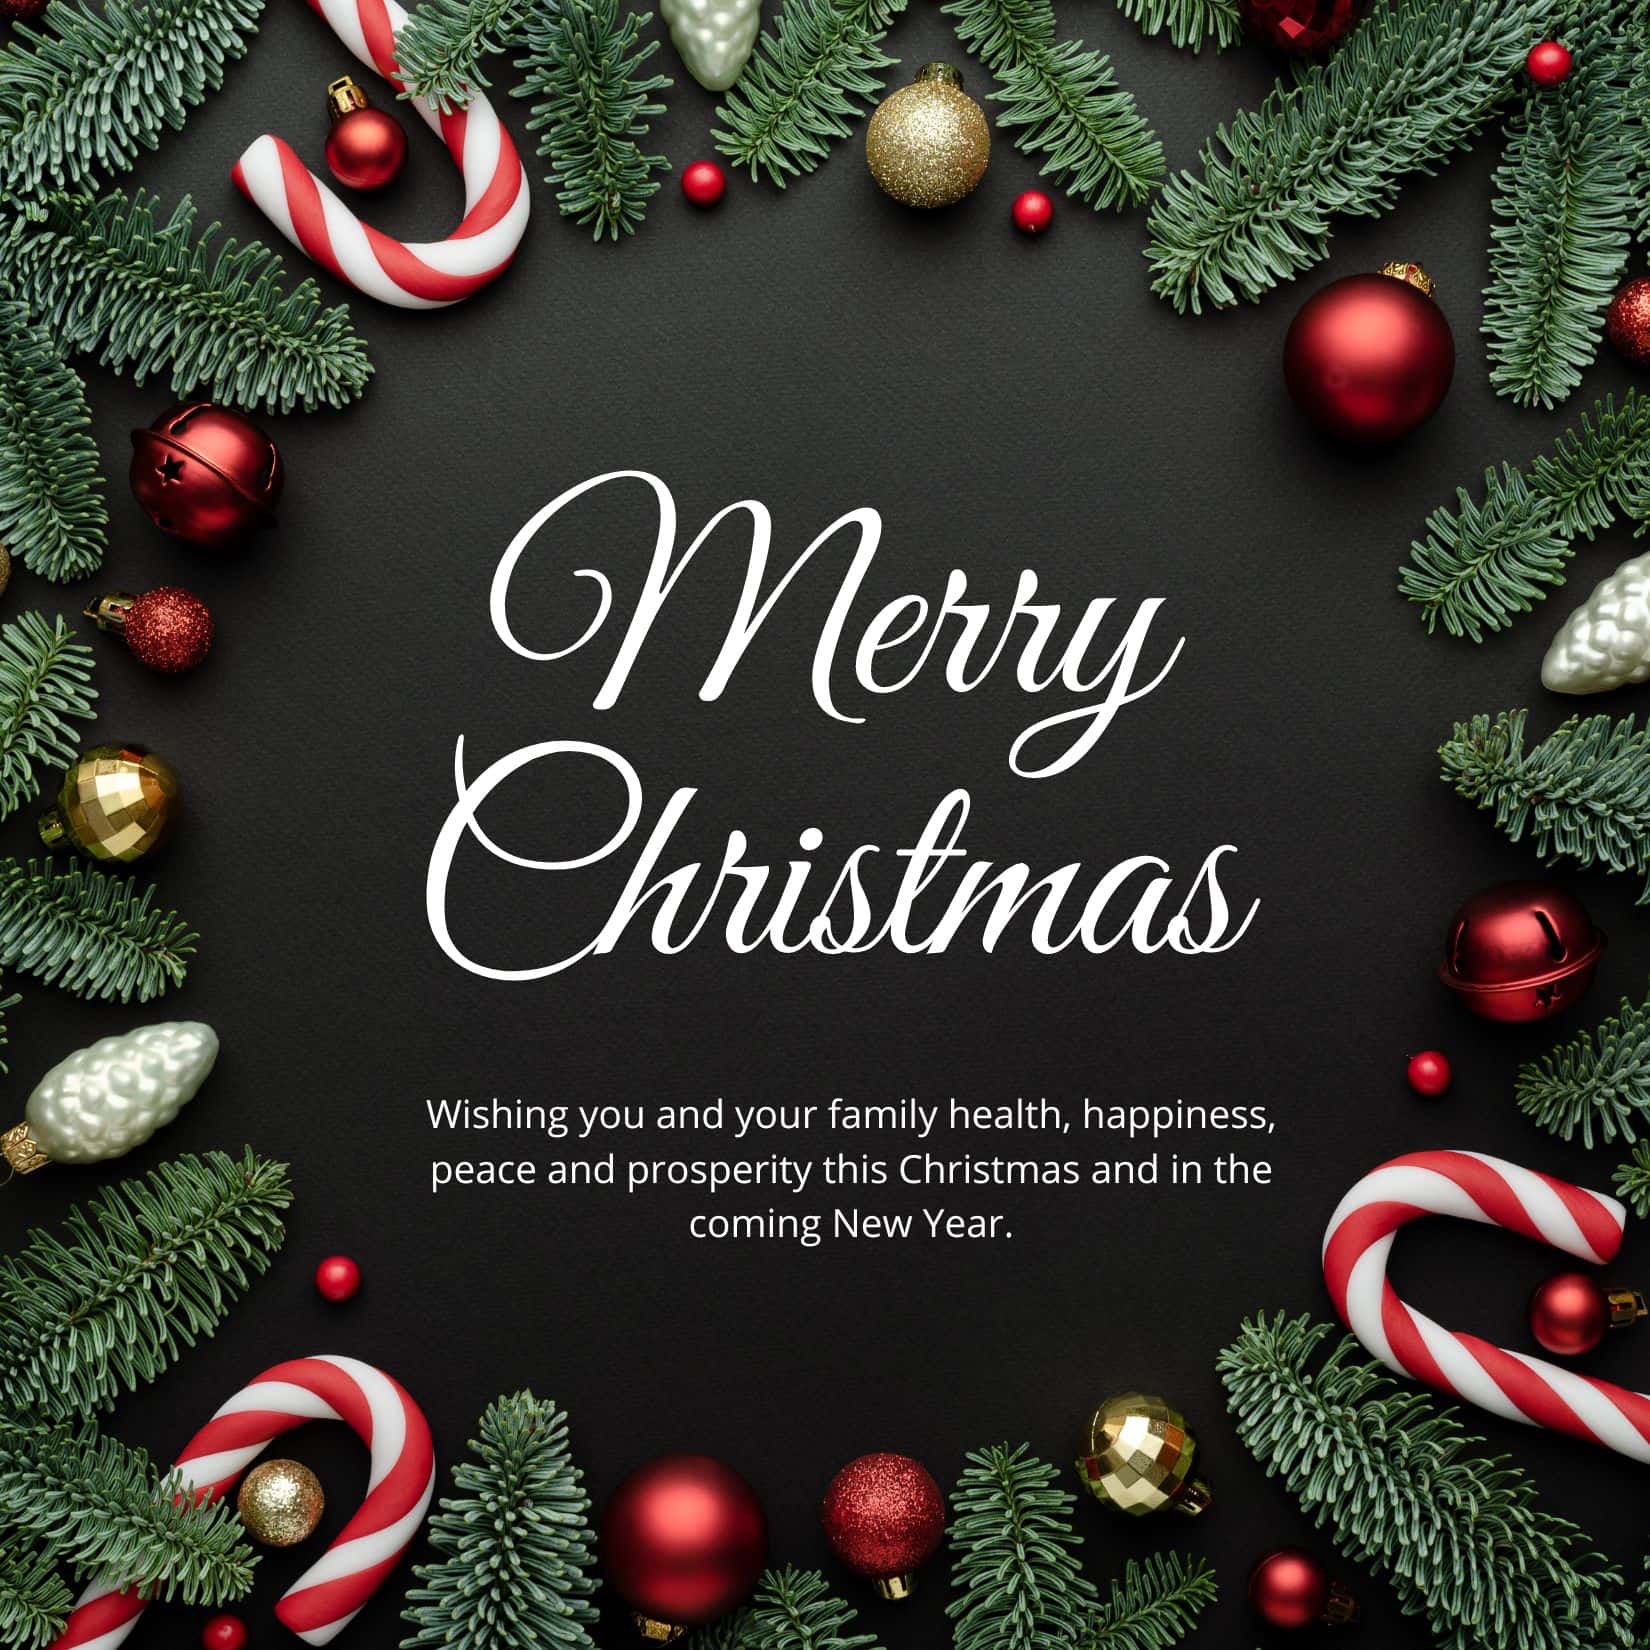 Wishing you and your family health, happiness, peace, and prosperity this Christmas!